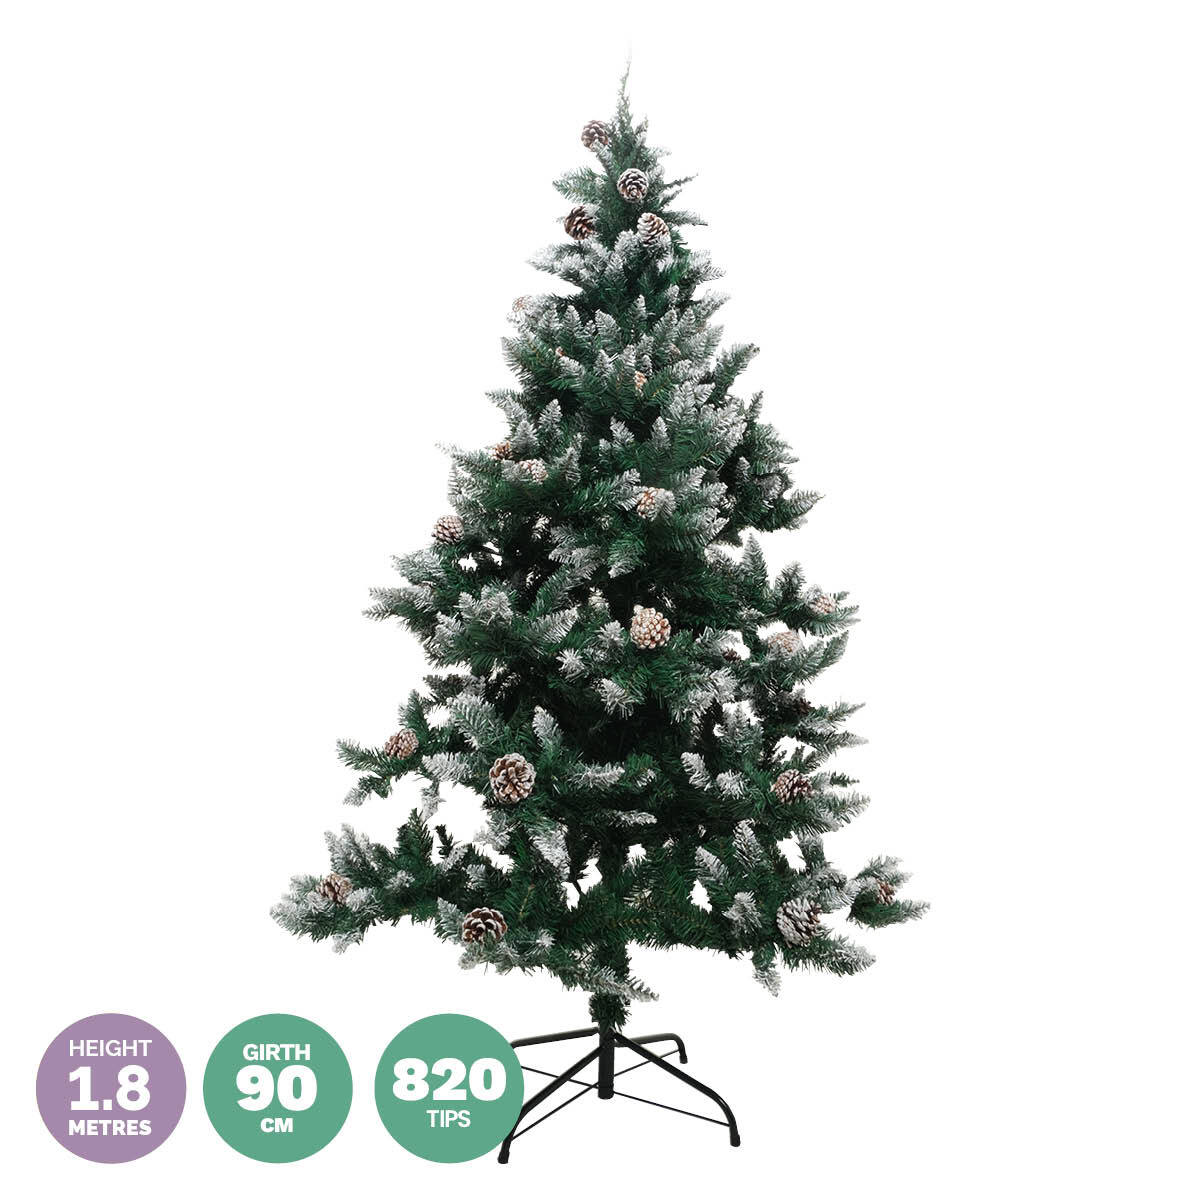 Christmas By Sas 1.8m Full Figured Tree Snow Covered Tips & Pine Cones - SILBERSHELL